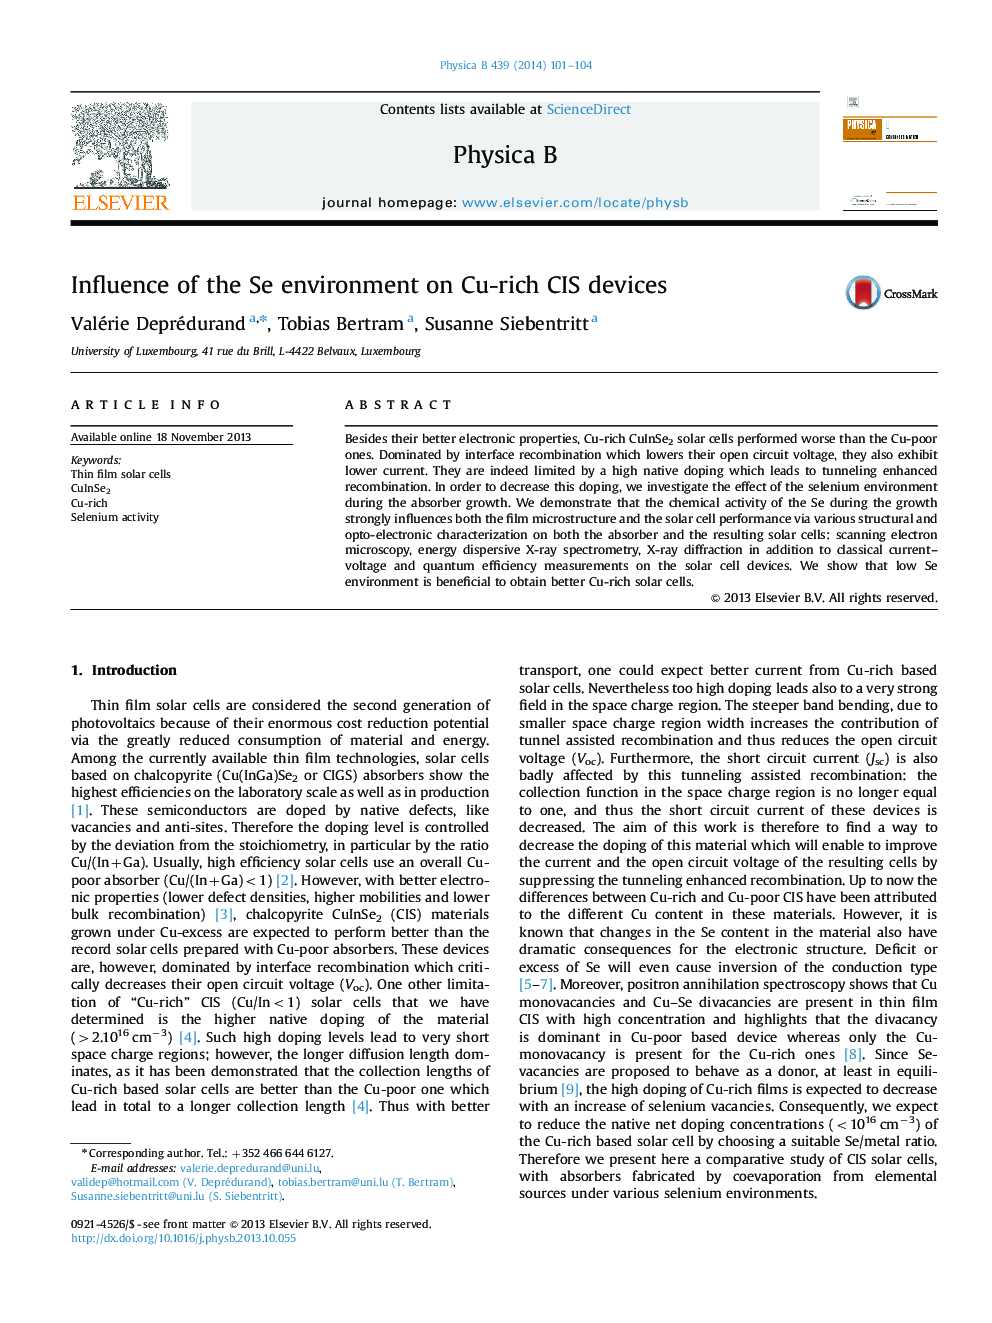 Influence of the Se environment on Cu-rich CIS devices